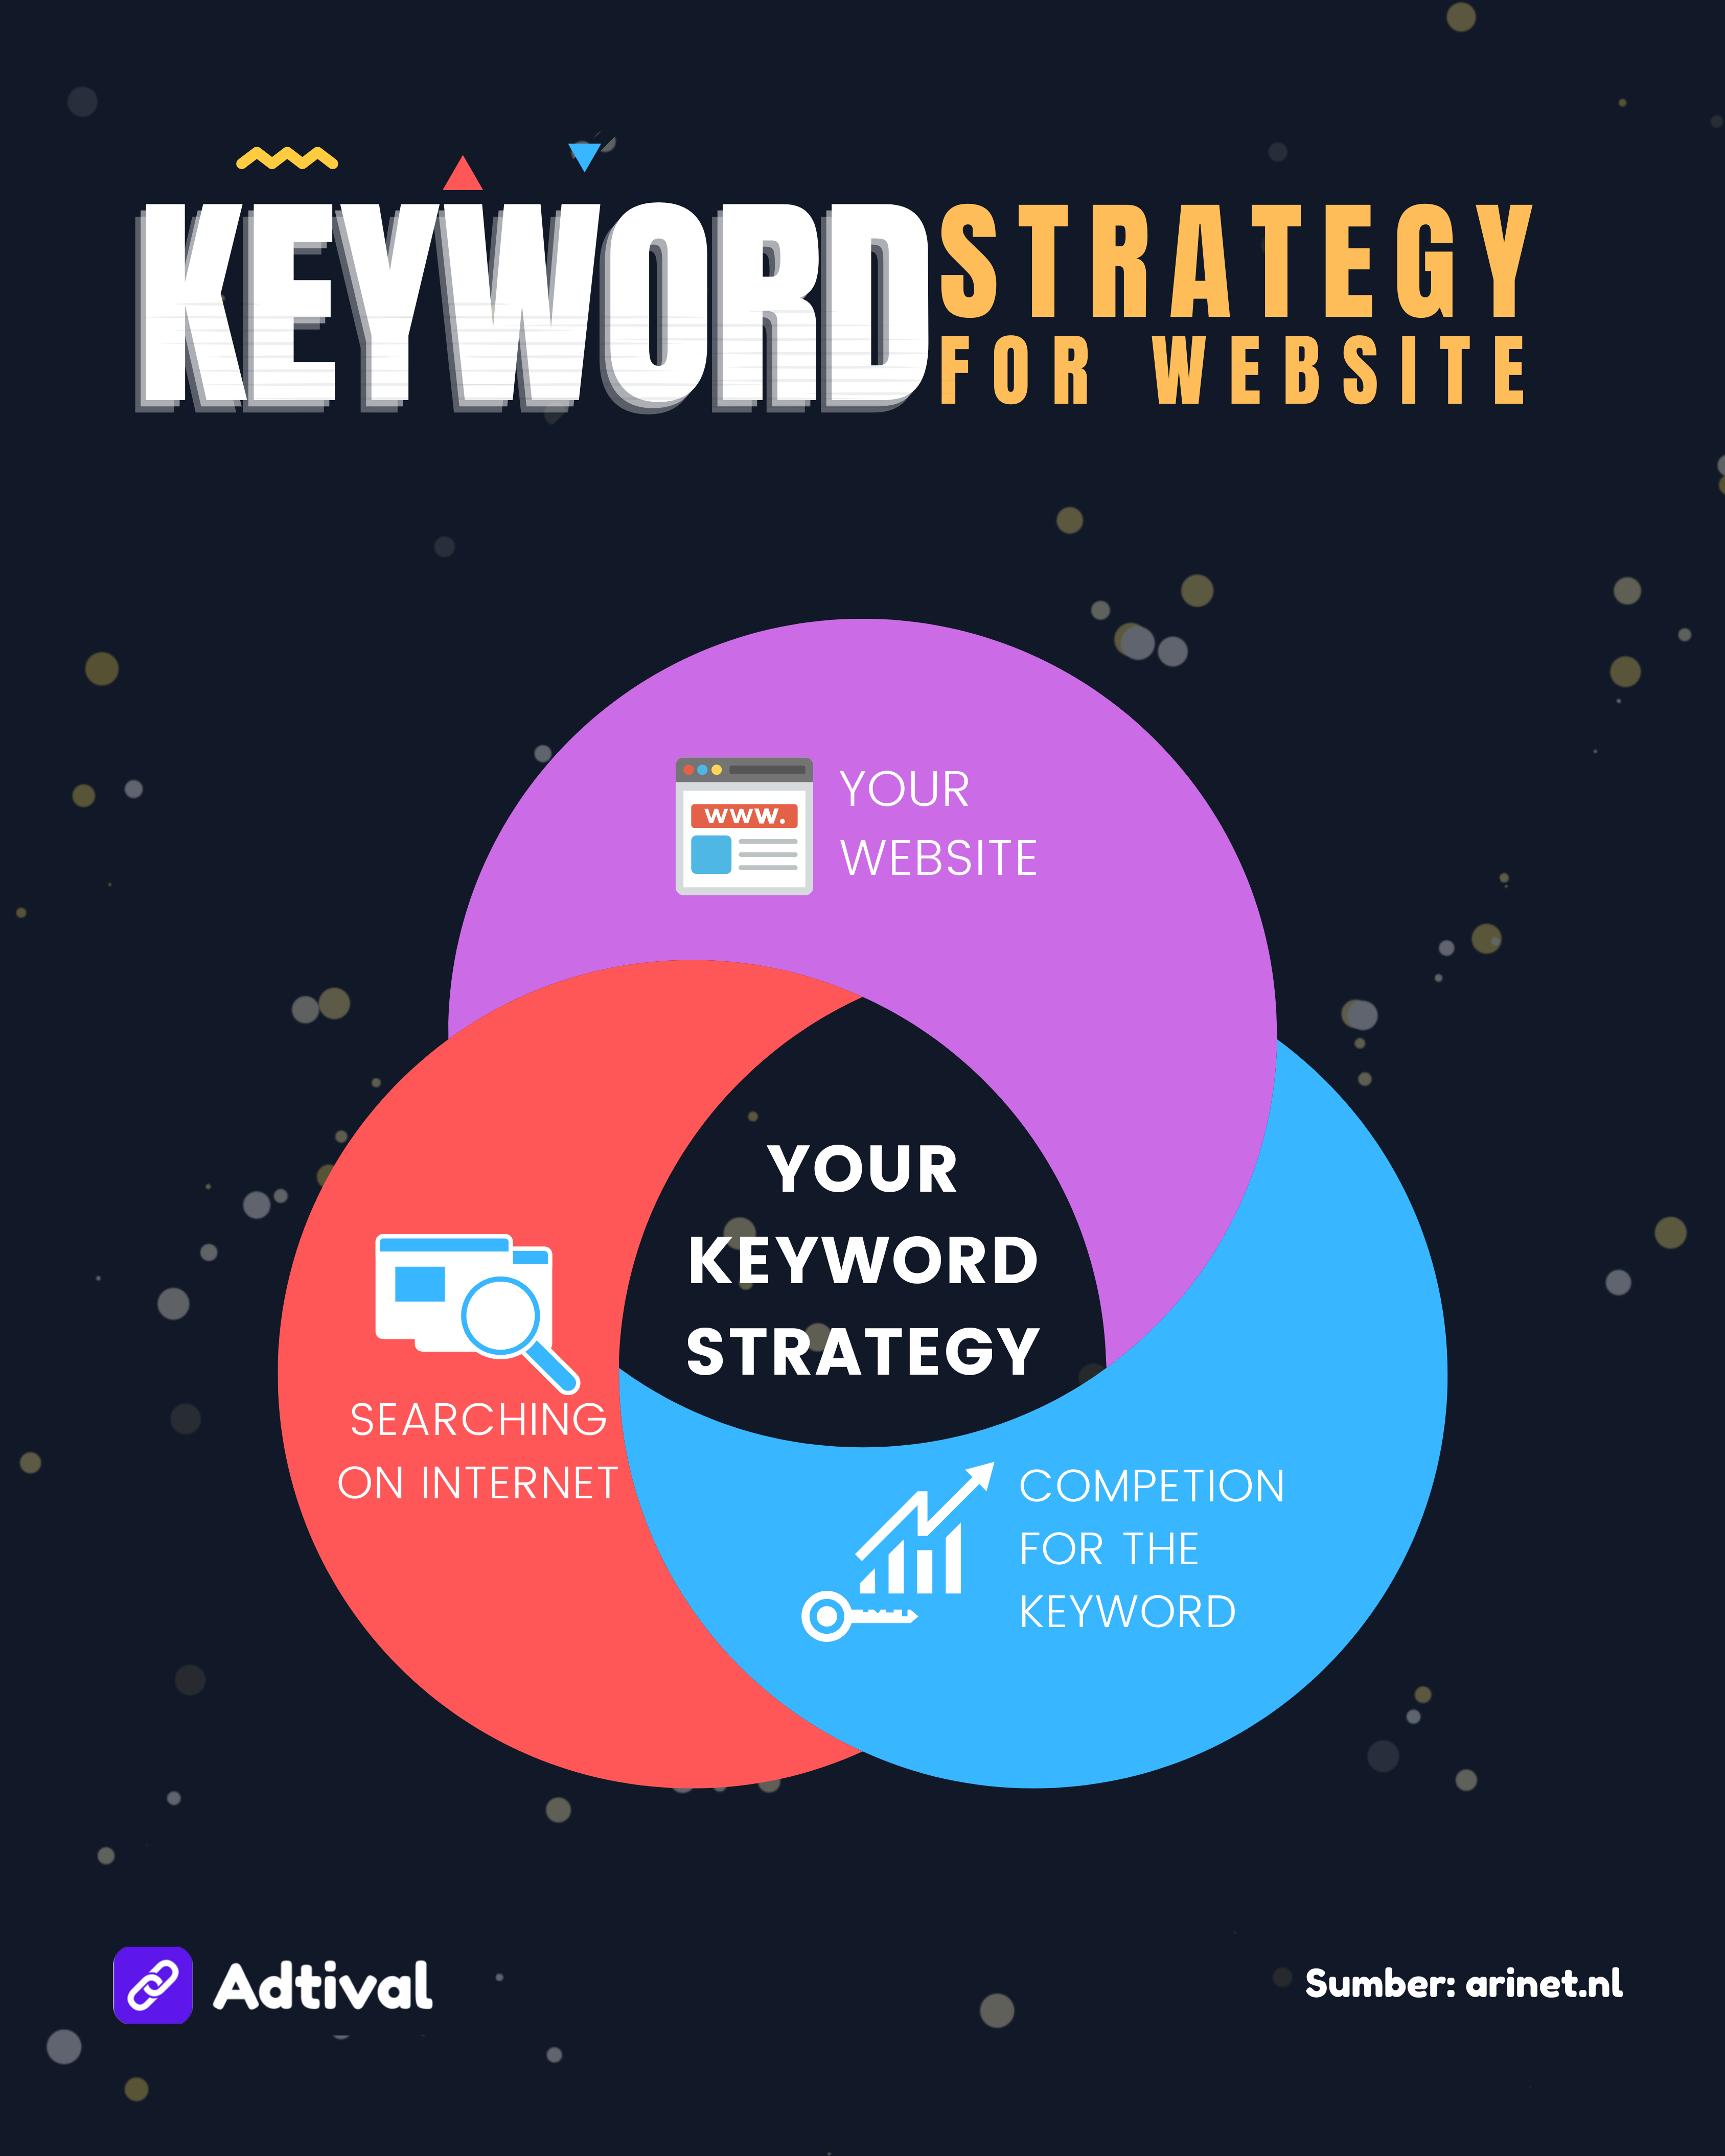 Keyword Strategy for Website